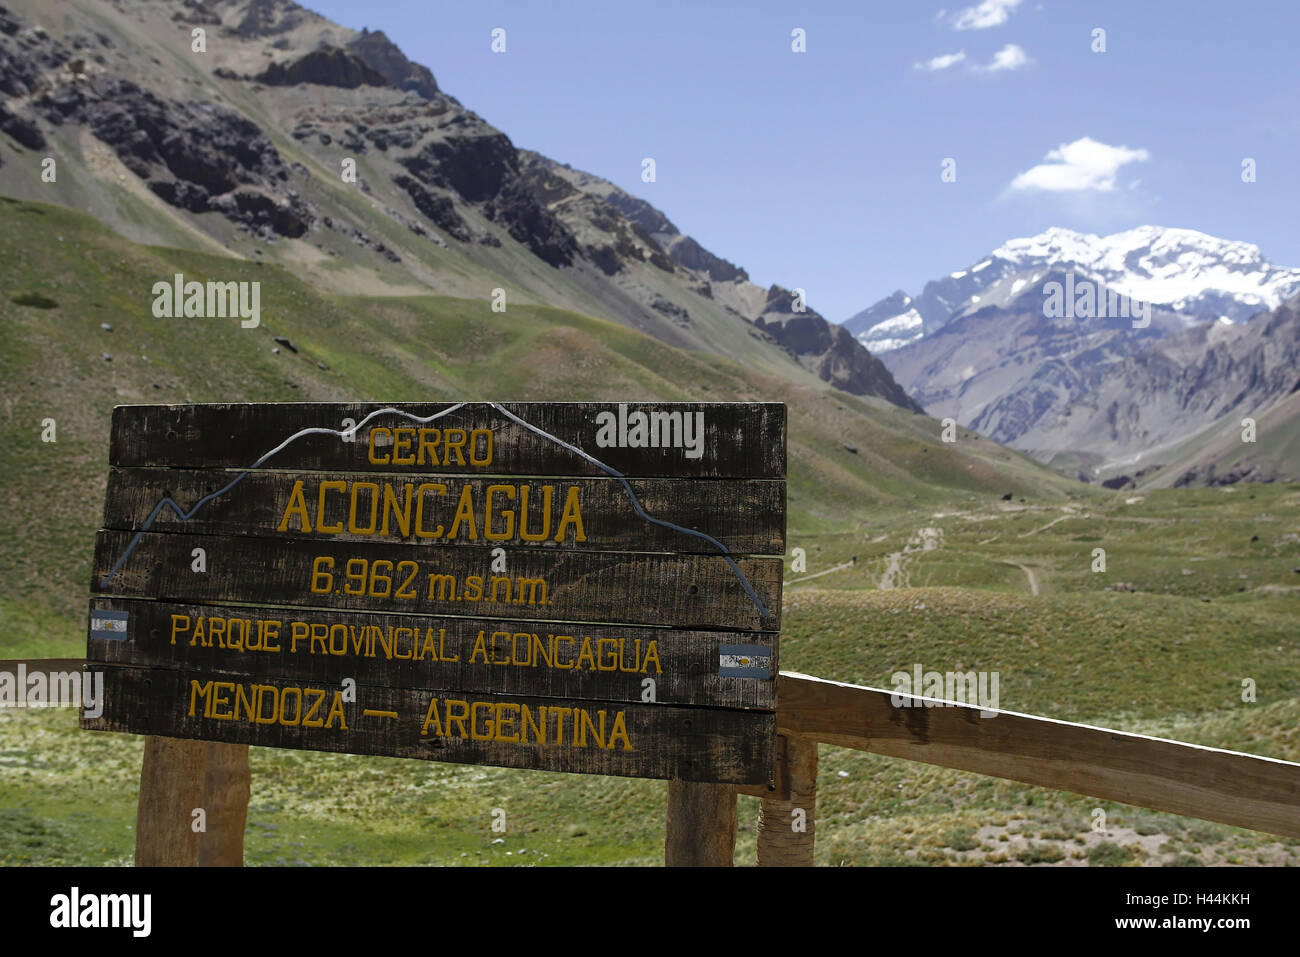 Rally Dakar 2010, the Andes, Chile, 11th stage, view at Aconcagua, Stock Photo